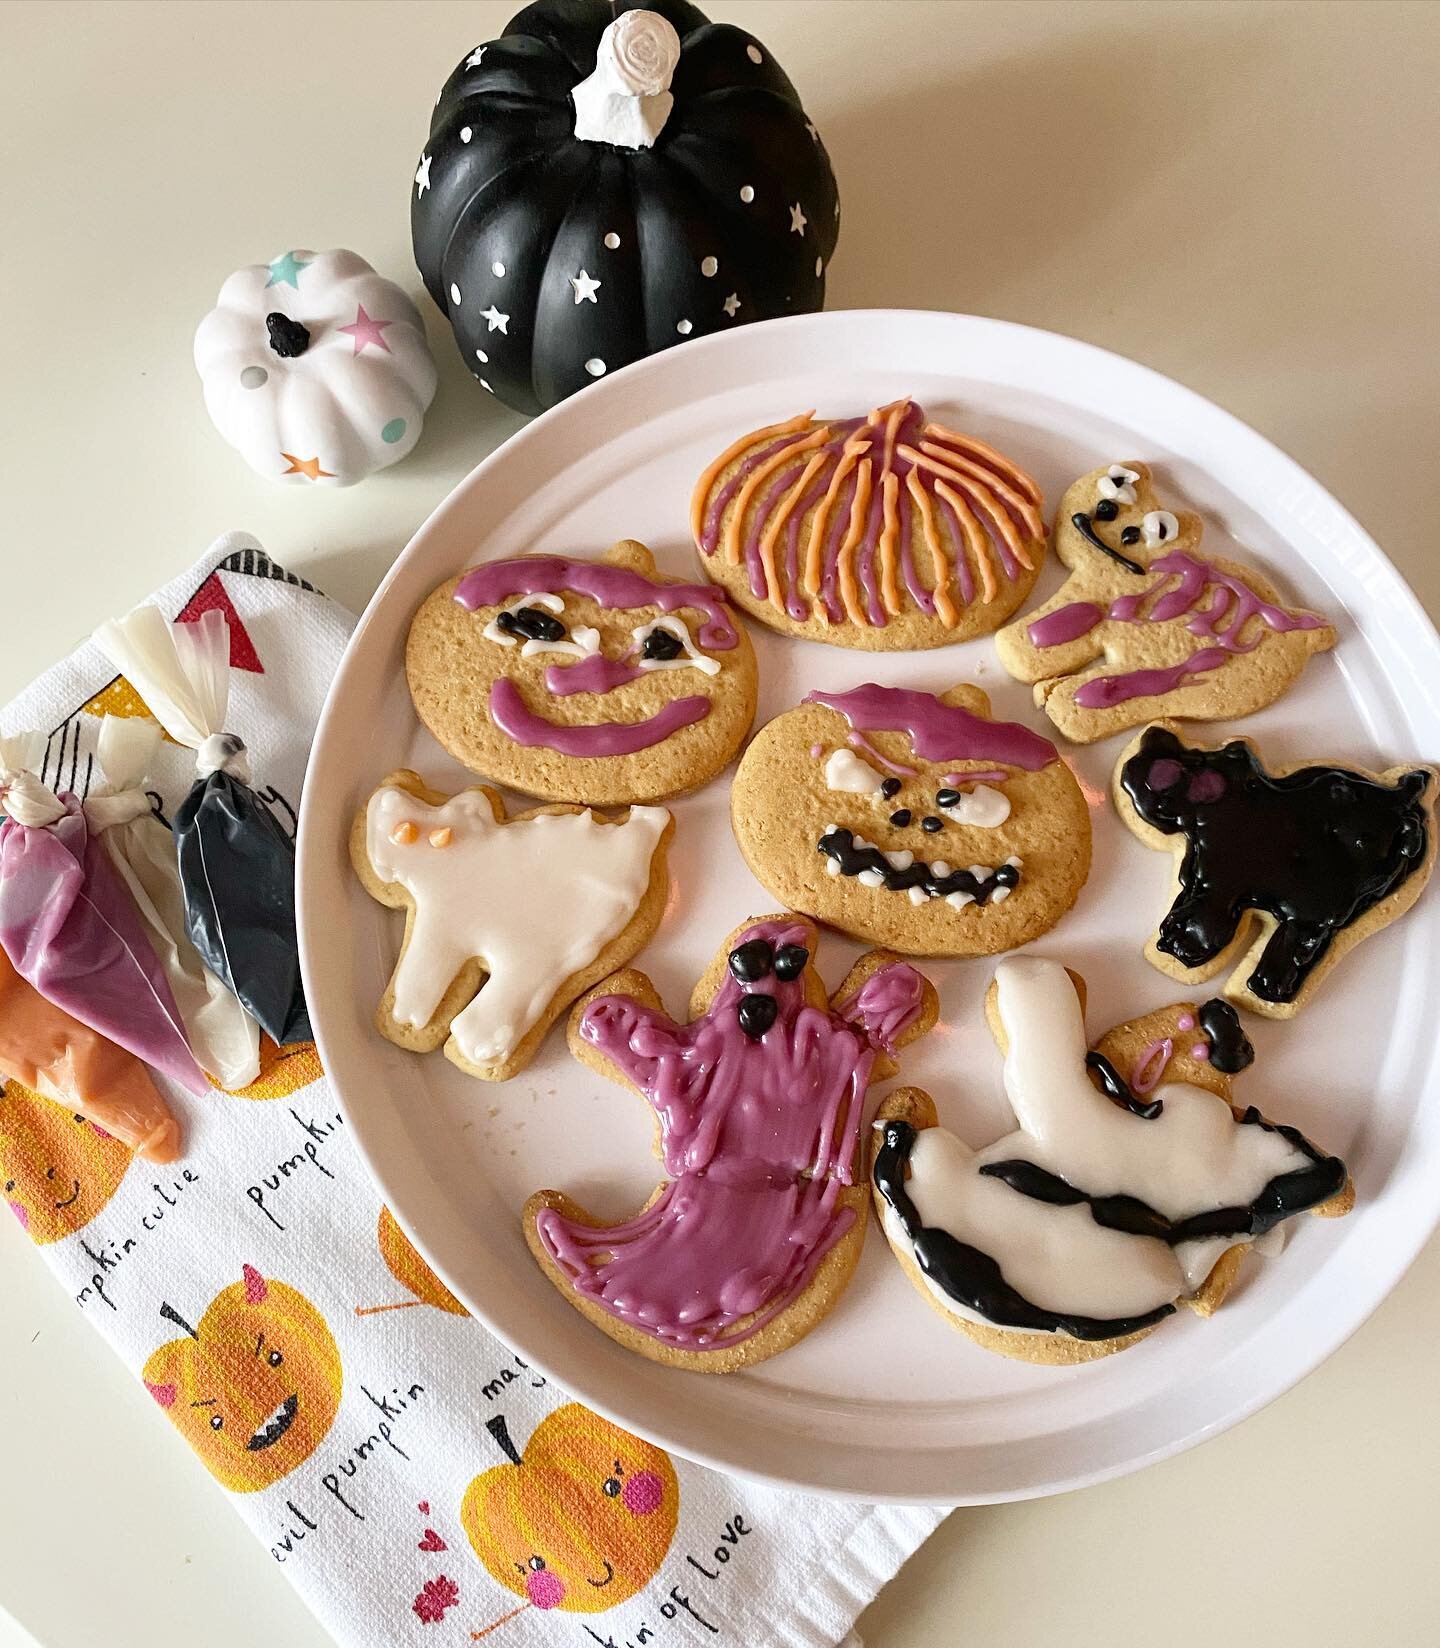 Treat yourself this weekend 👻 

We had so much fun with this cookie kit from @cafegratitude 🎃

Can you guess which ones I decorated vs my main man @dantildawn? 🐈&zwj;⬛ 
.
.
.
.
.
.
.
.
#inthekitchwithmaris #spookyseason #cafegratitude #cafegratitu